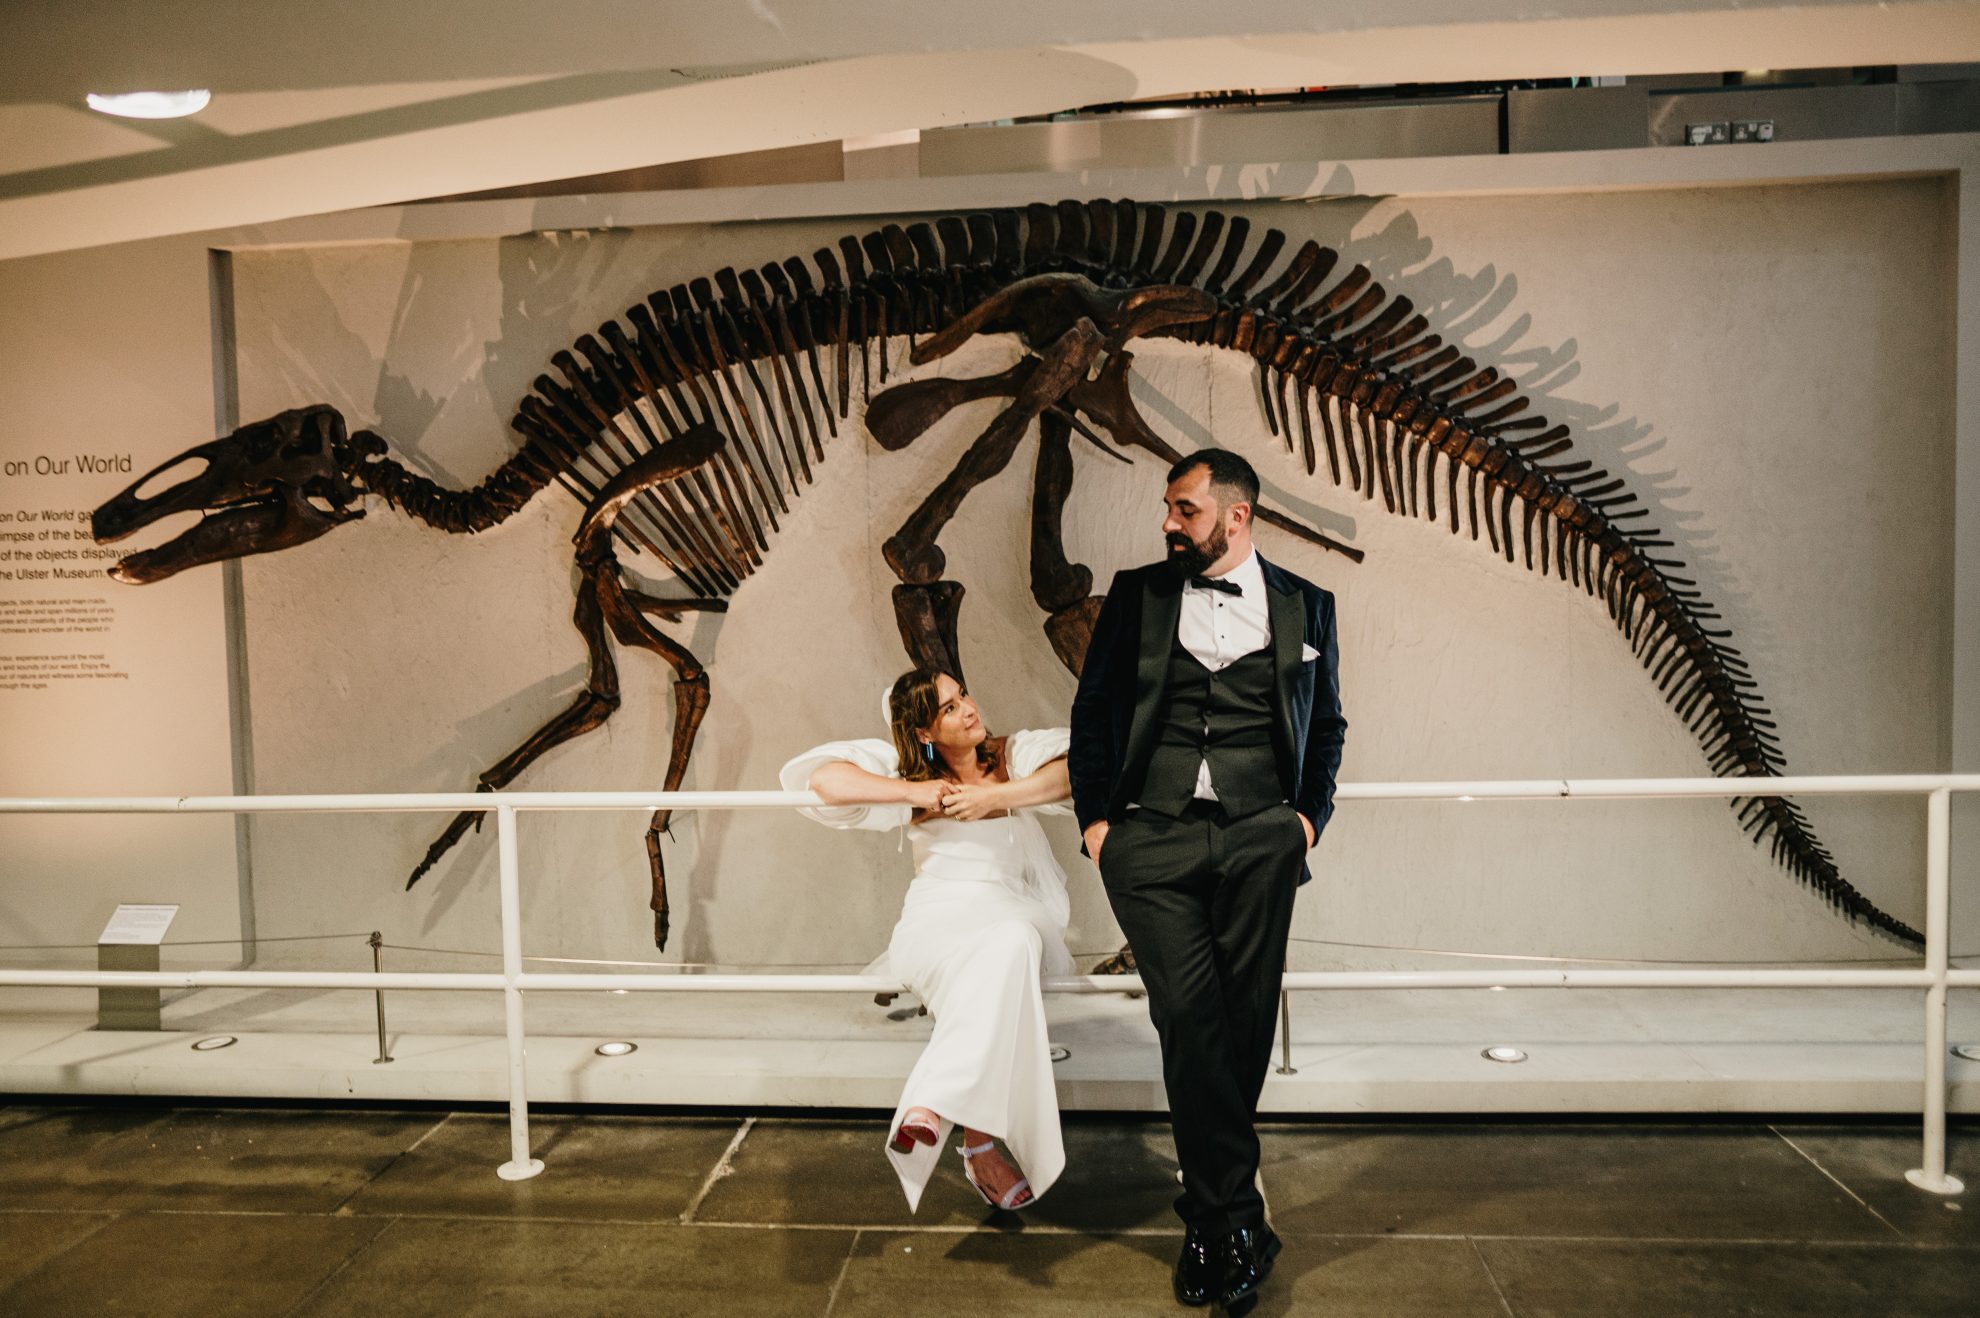 The newlweds in the ulste rmseum belfast with dinosaur